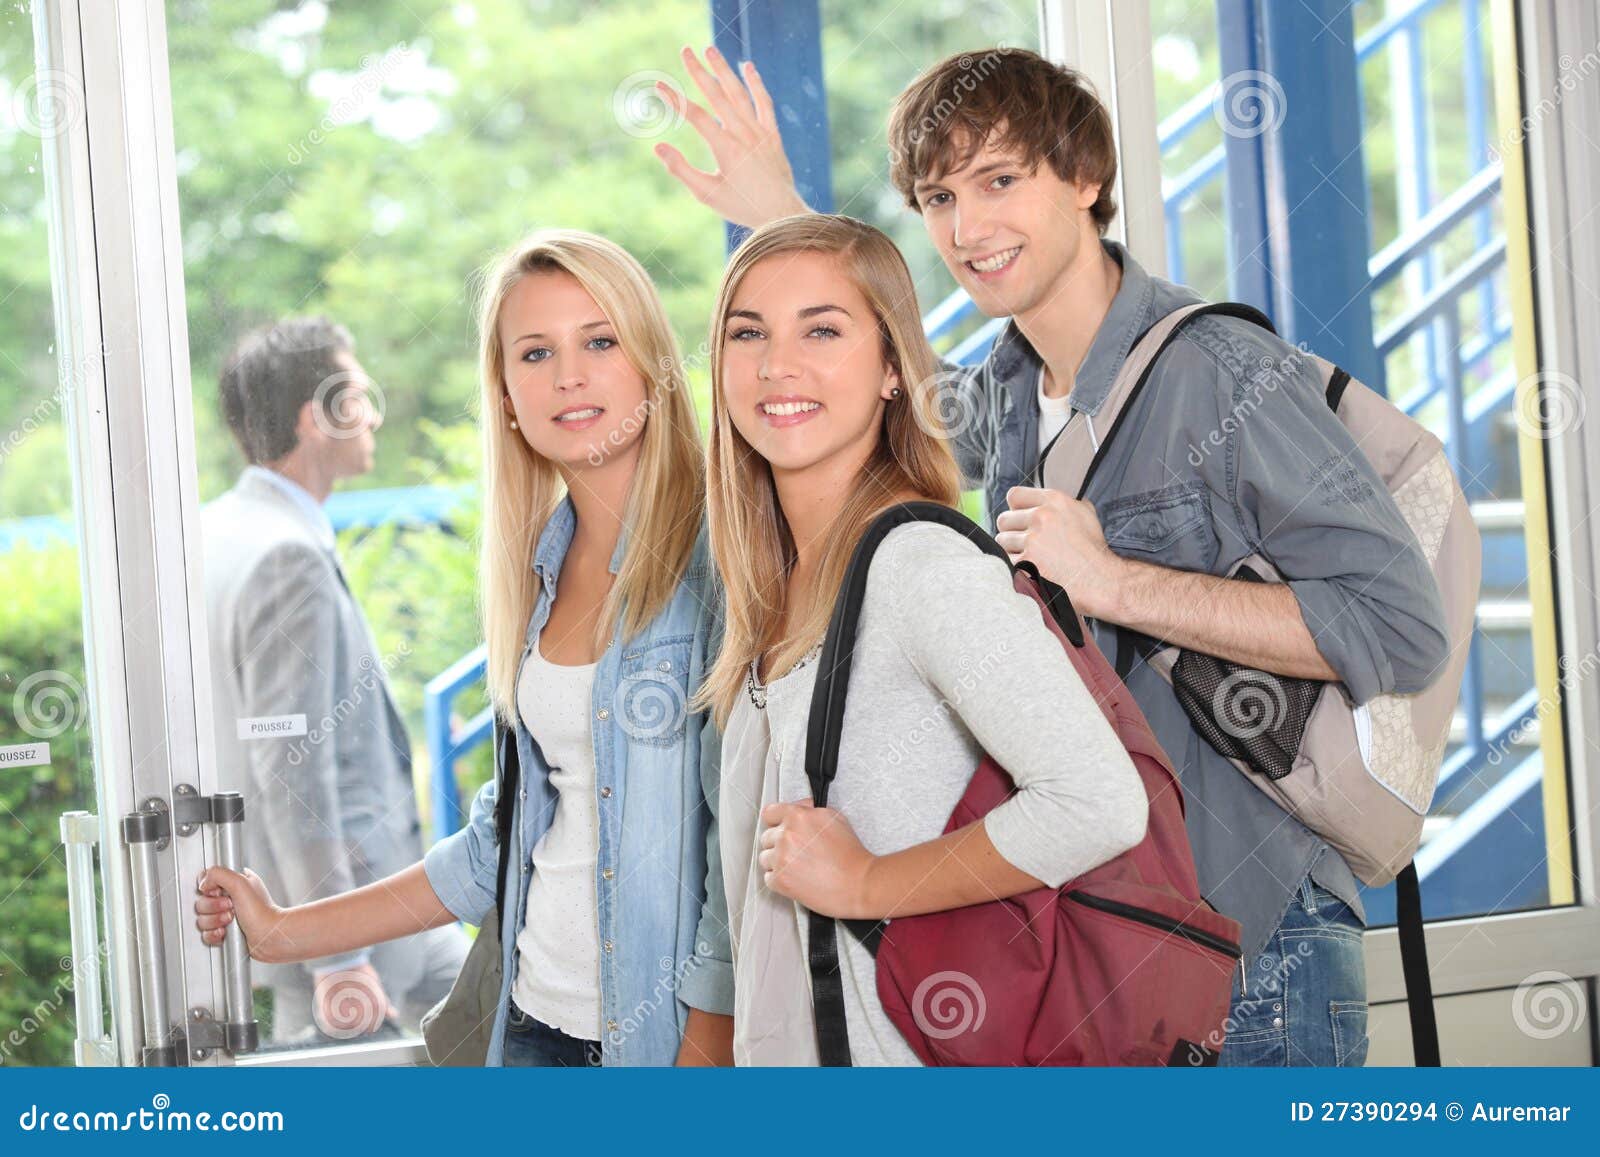 Students Leaving Stock Images - Image: 27390294